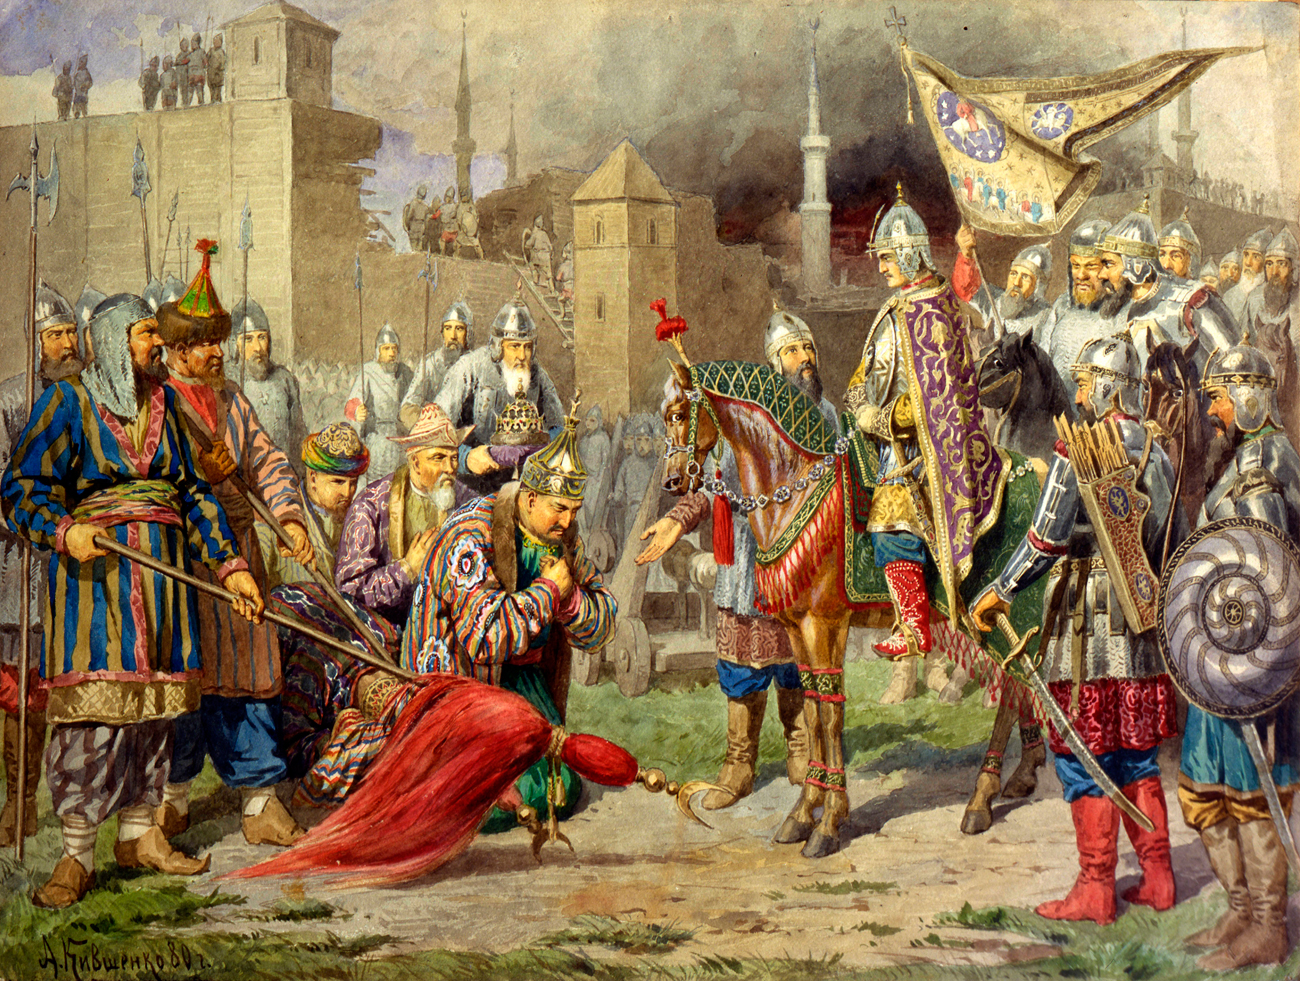 Tsar Ivan IV Conquering Kazan in 1552, 1880. Kazan, the capital of the Tatar Khanate of Kazan, fell to the Russian army of Ivan the Terrible after a siege in 1552. Many of the city's defenders and civilian inhabitants were massacred